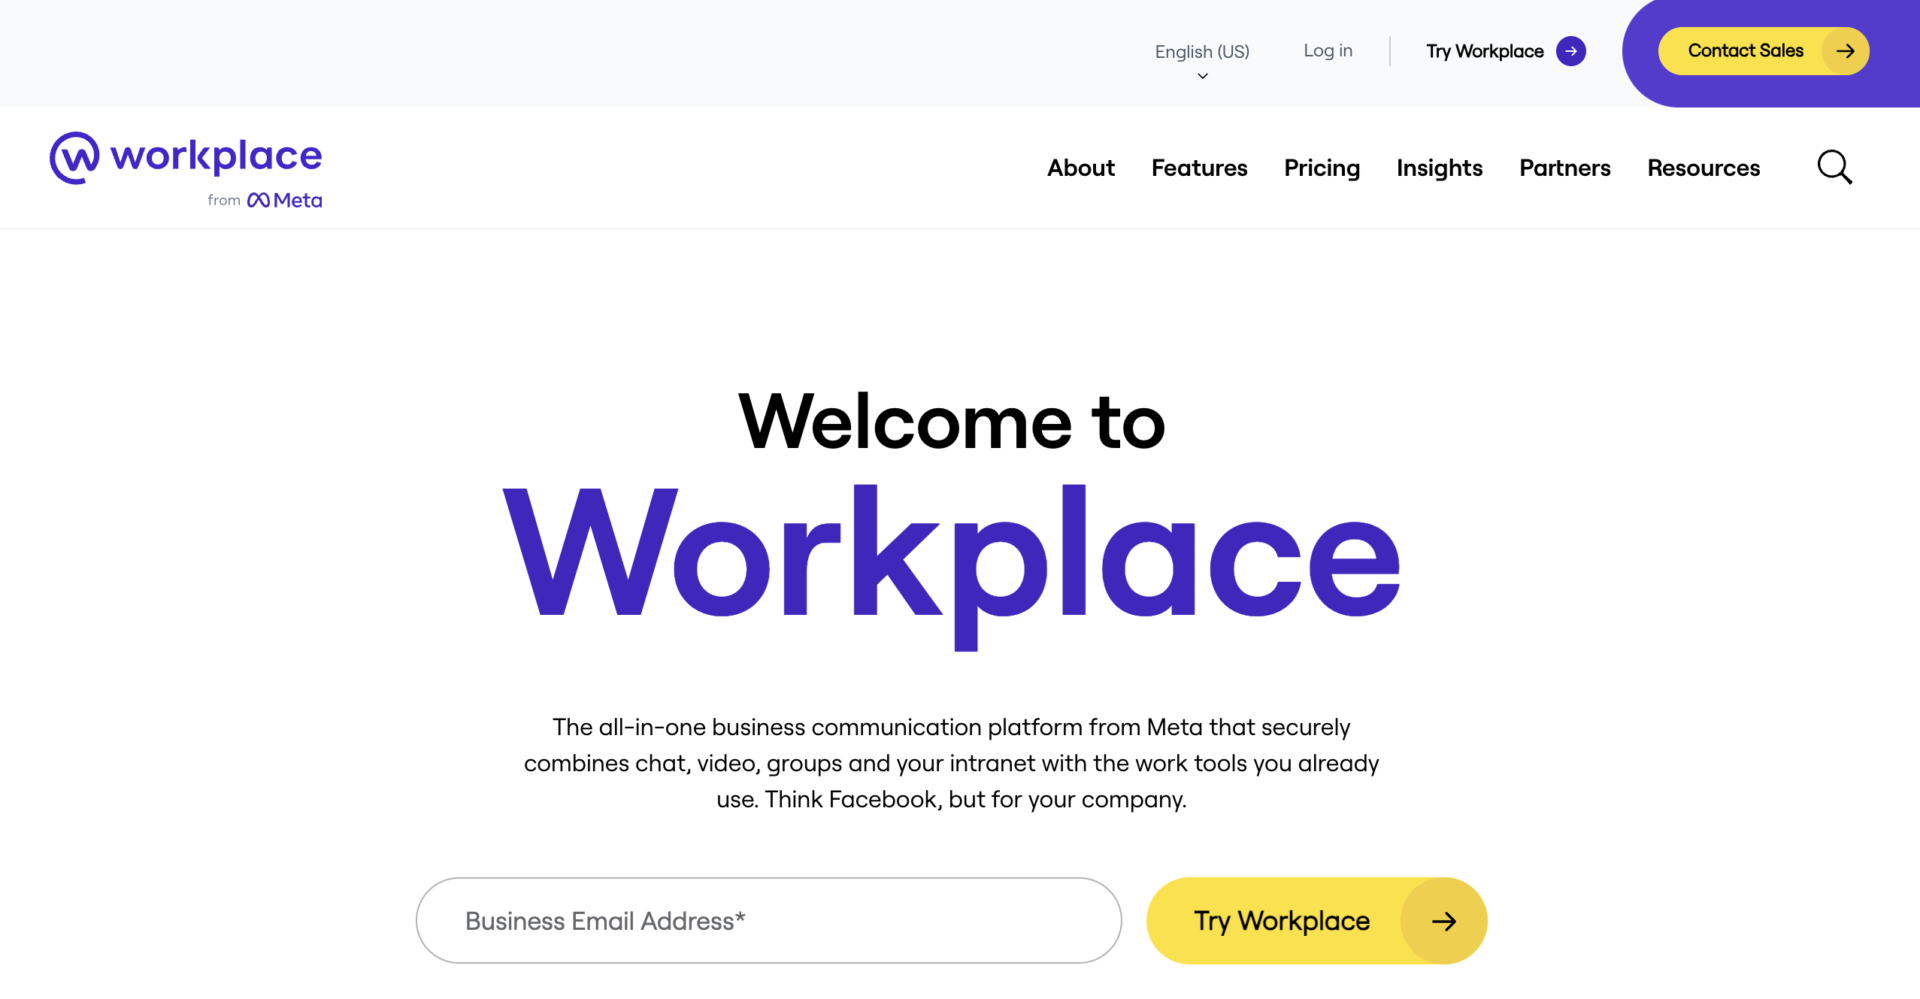 Top page of Workplace from Meta